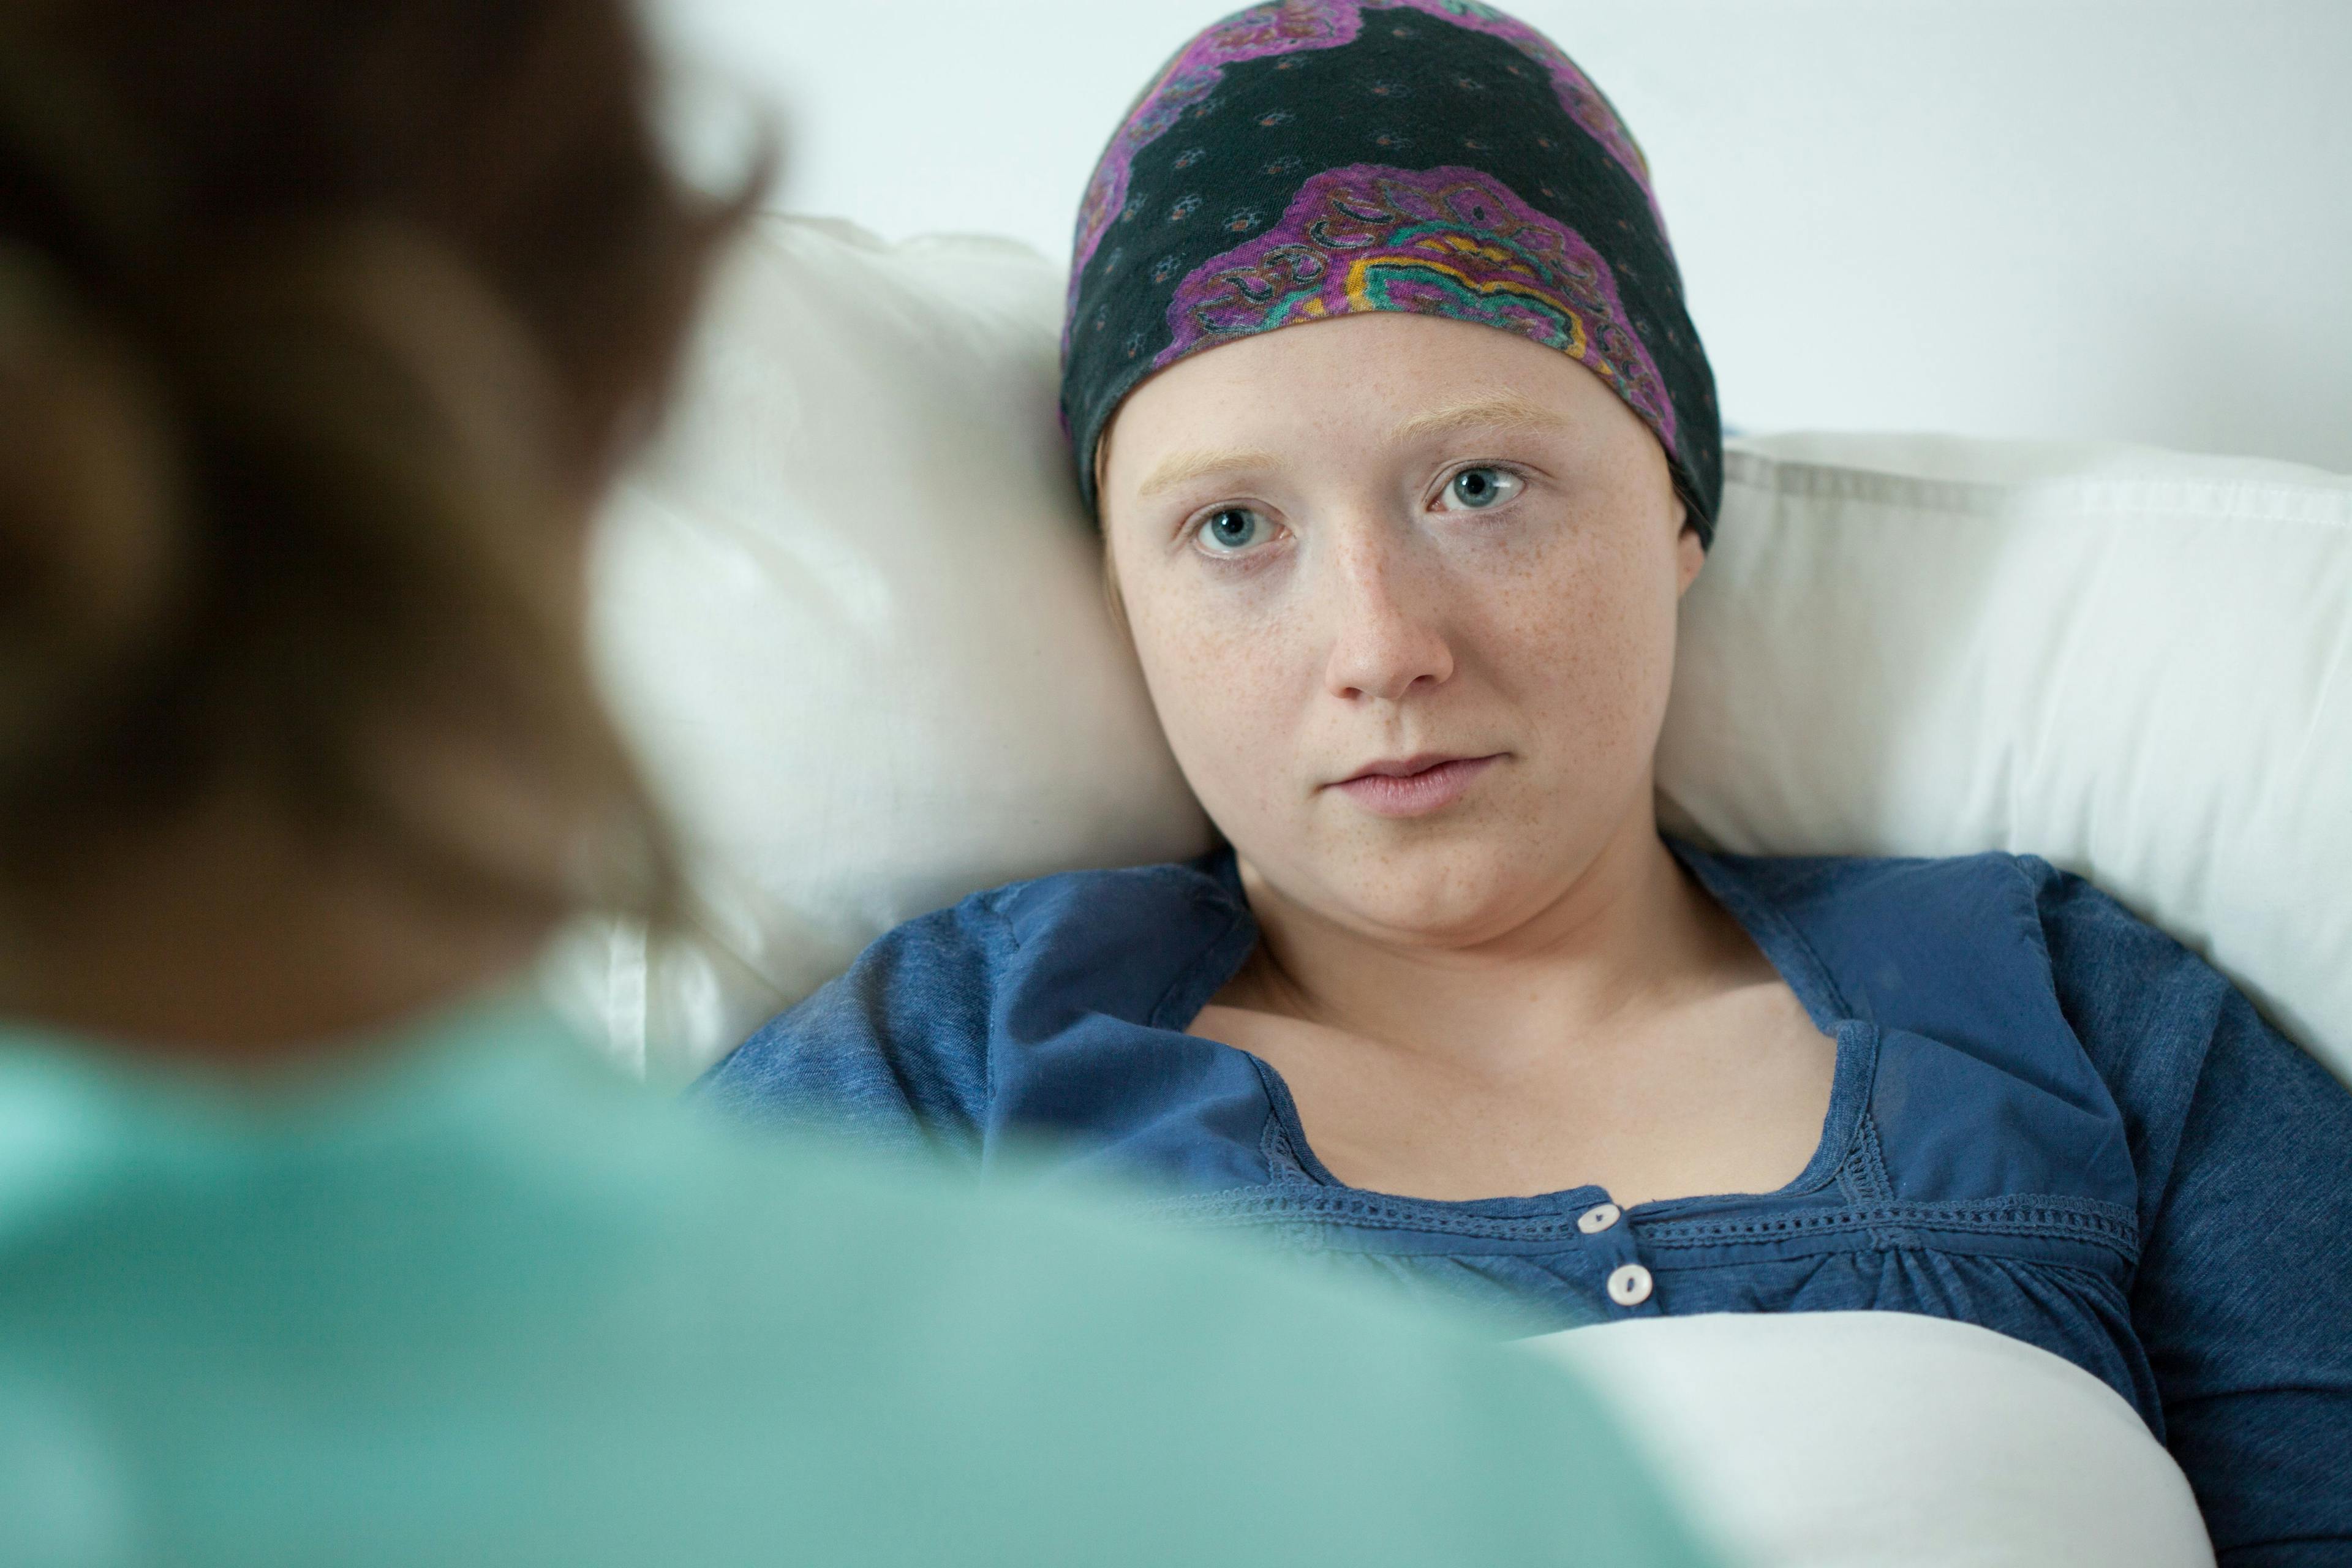 Adolescents With Cancer Get Psychosocial Support From Healthy Peers in Innovative Program